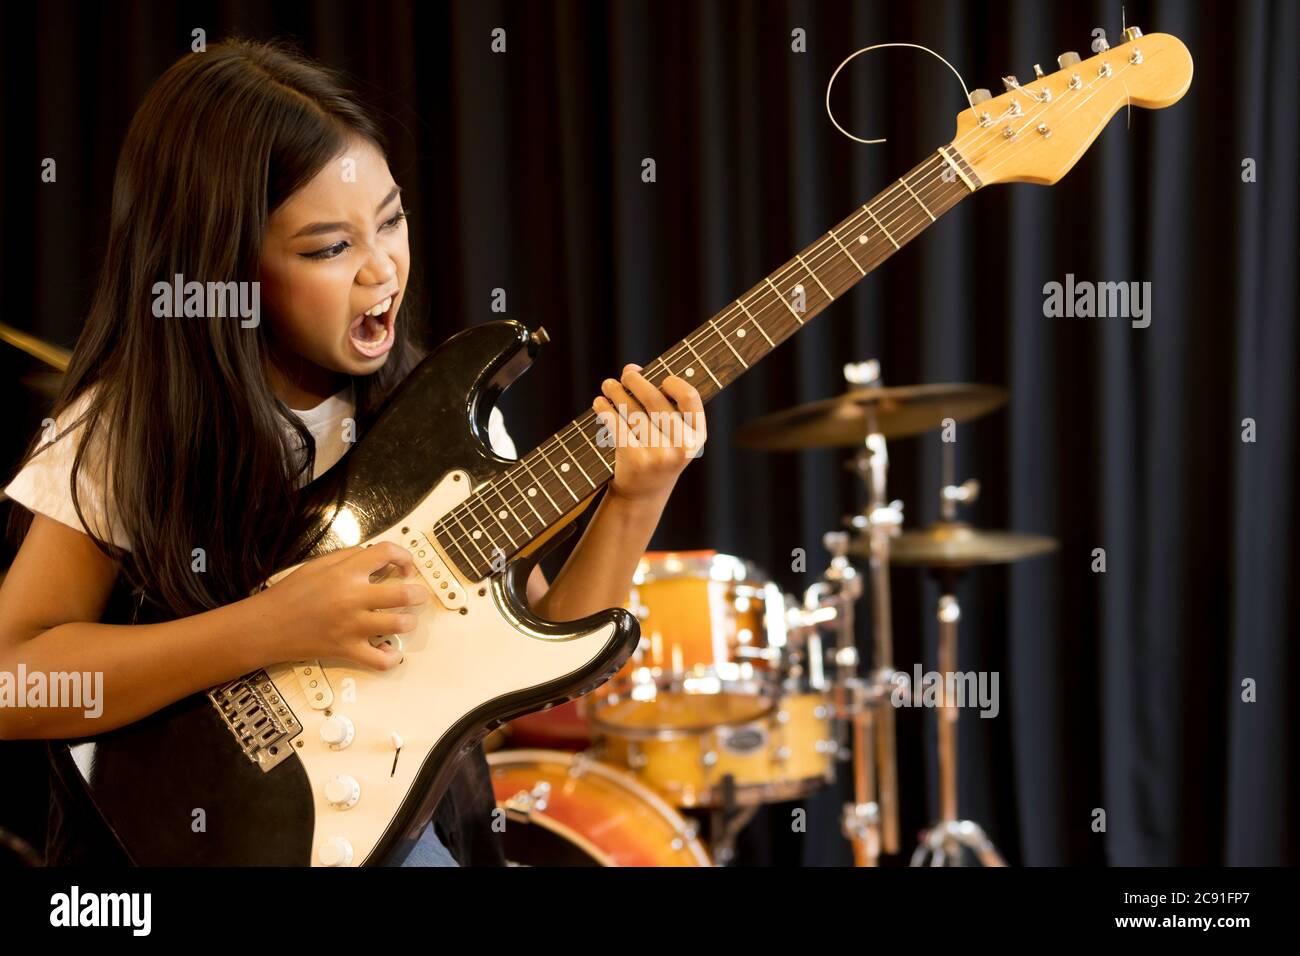 A cute young Asian elementary school girl with long hair playing with serious electric guitar in rock songs. Stock Photo